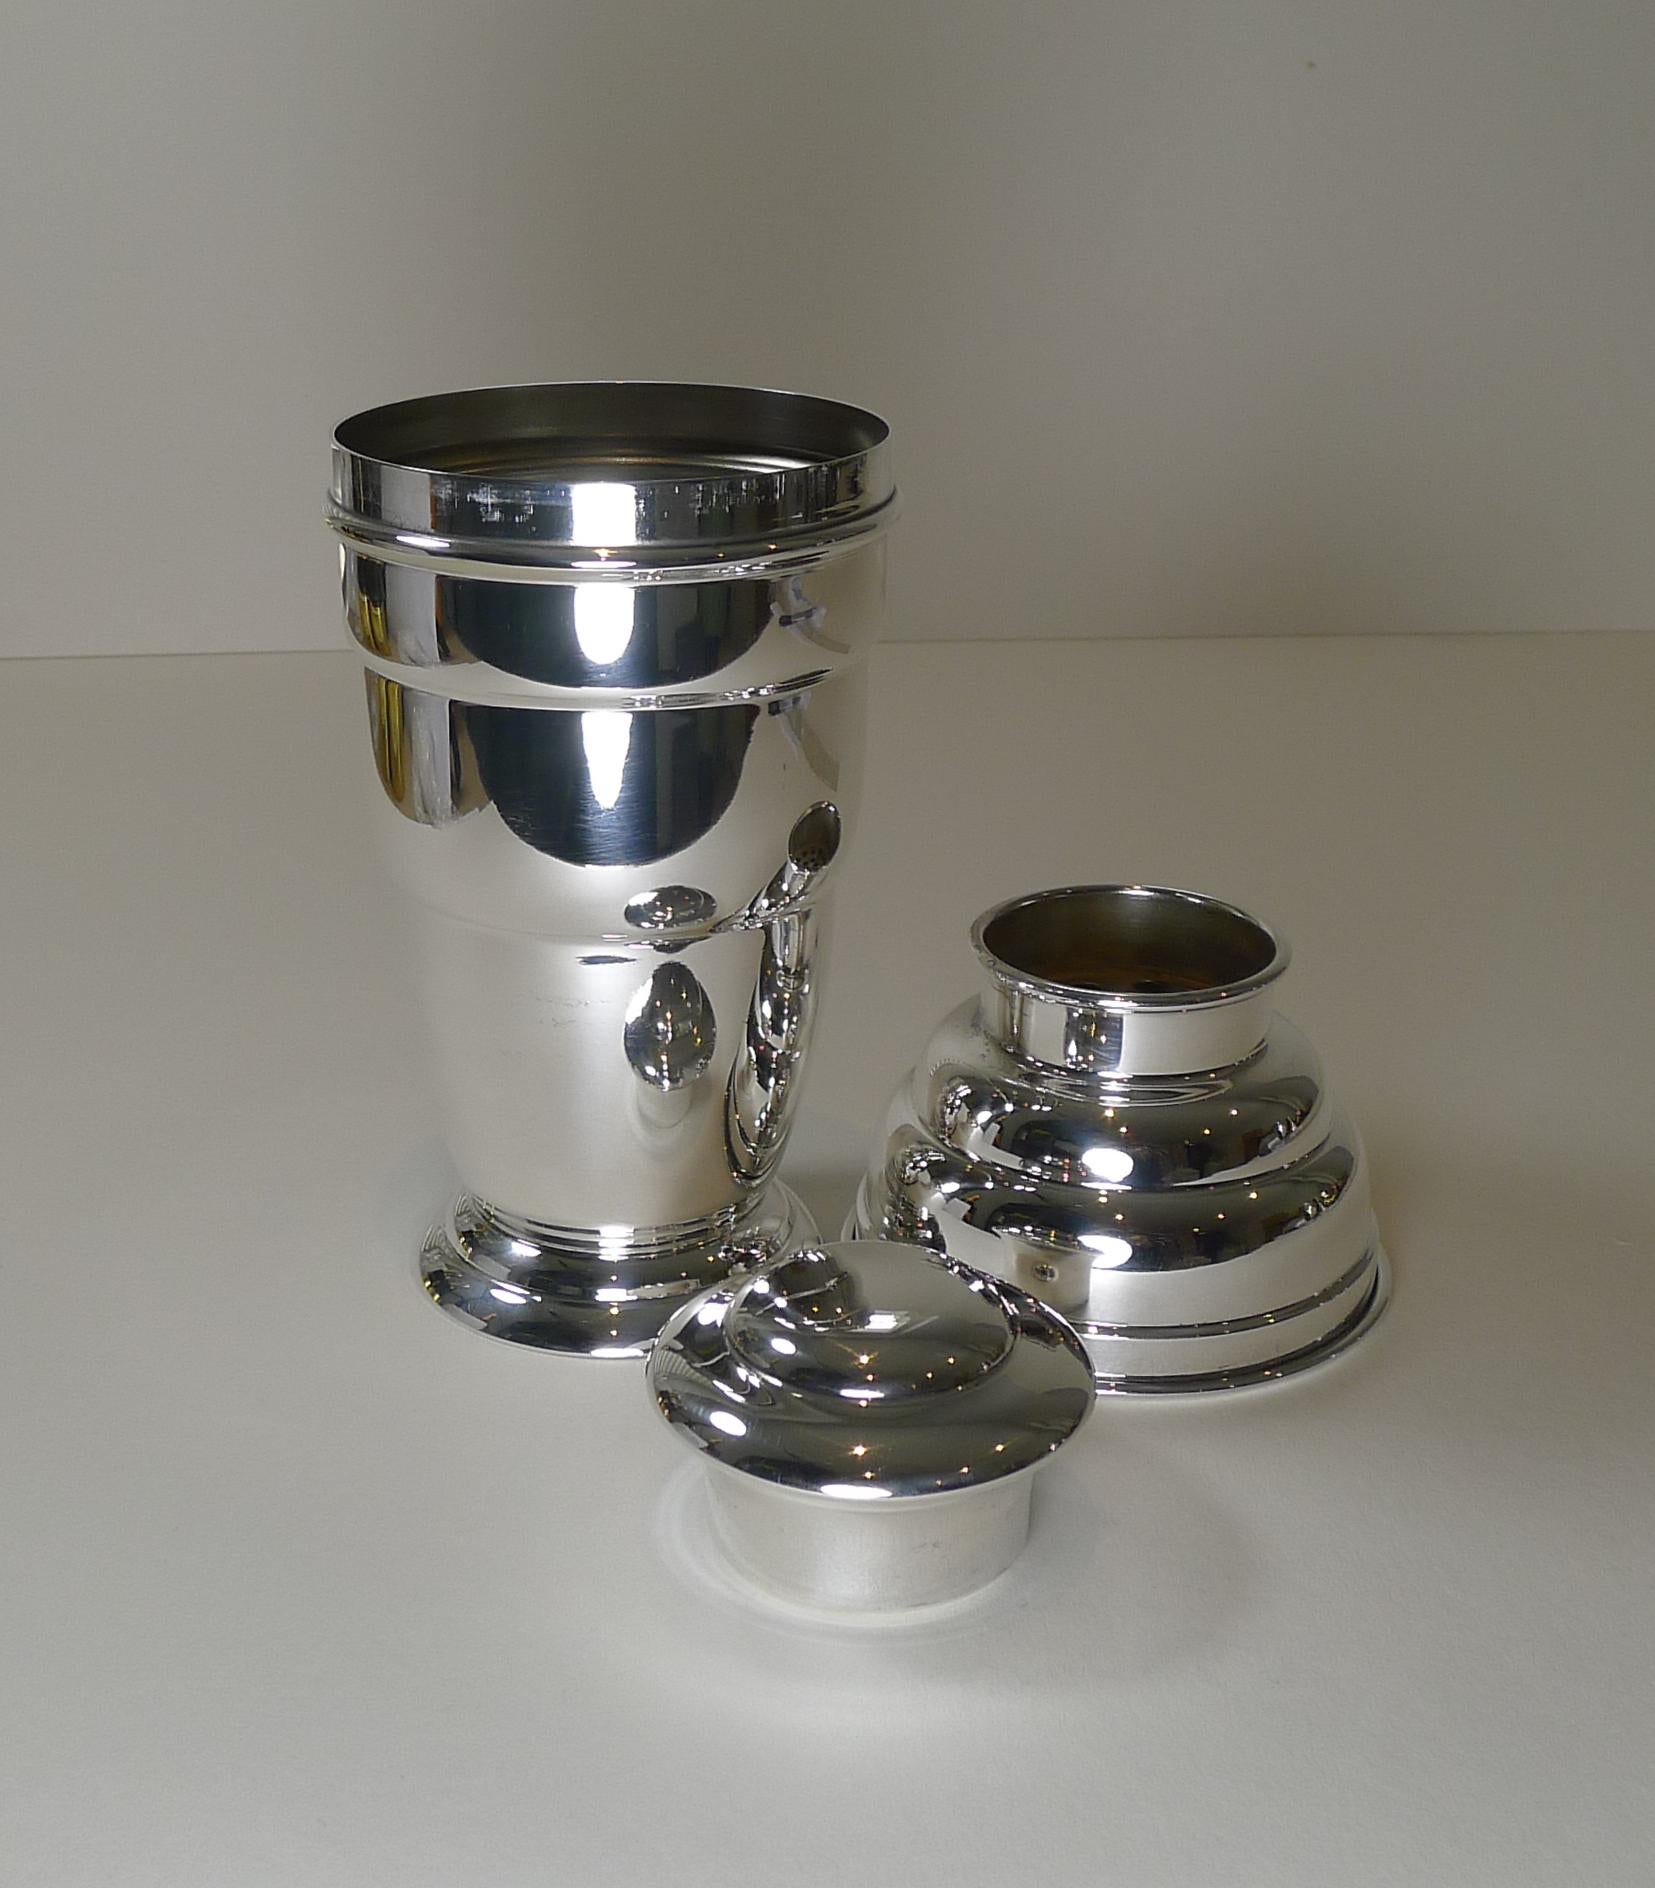 English Art Deco Cocktail Shaker c.1930, Silver Plate 4